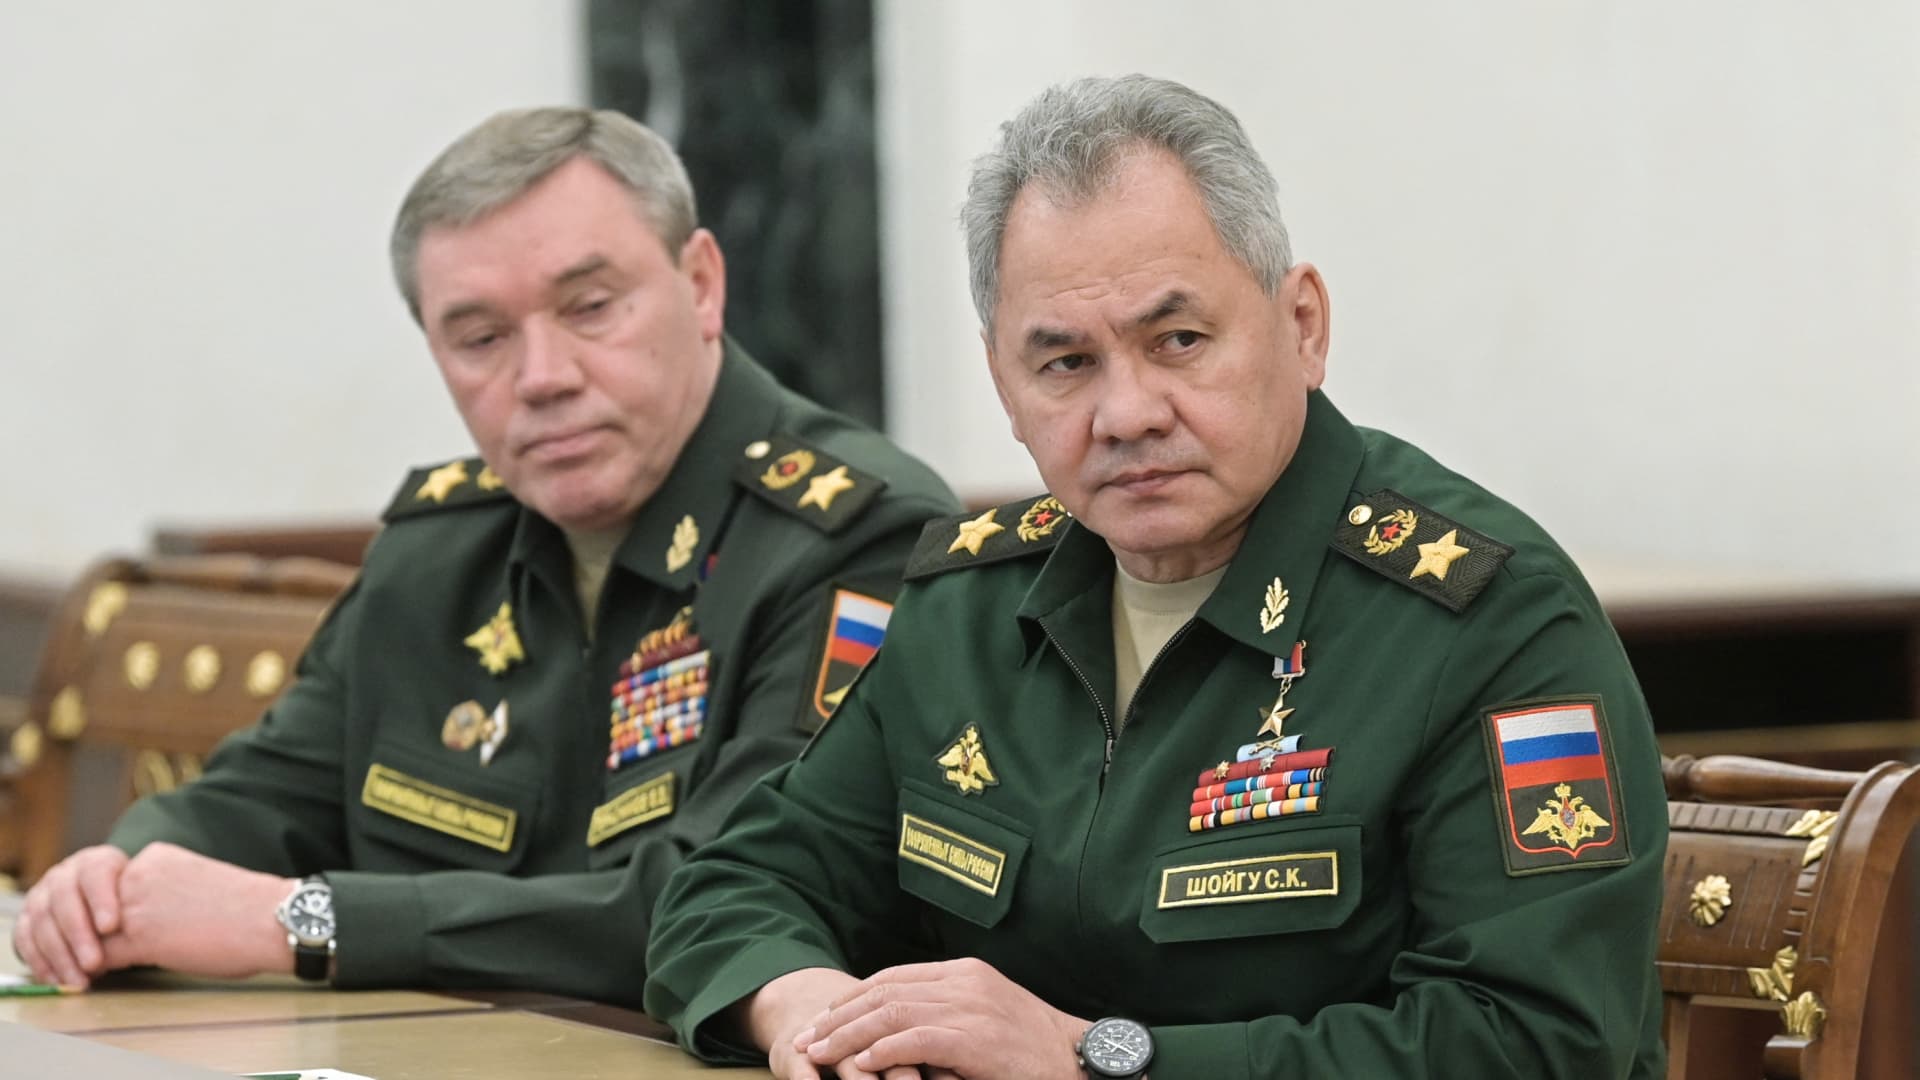 Russian Defense Minister Sergei Shoigu and chief of the general staff Valery Gerasimov in Moscow on Feb. 27, 2022.